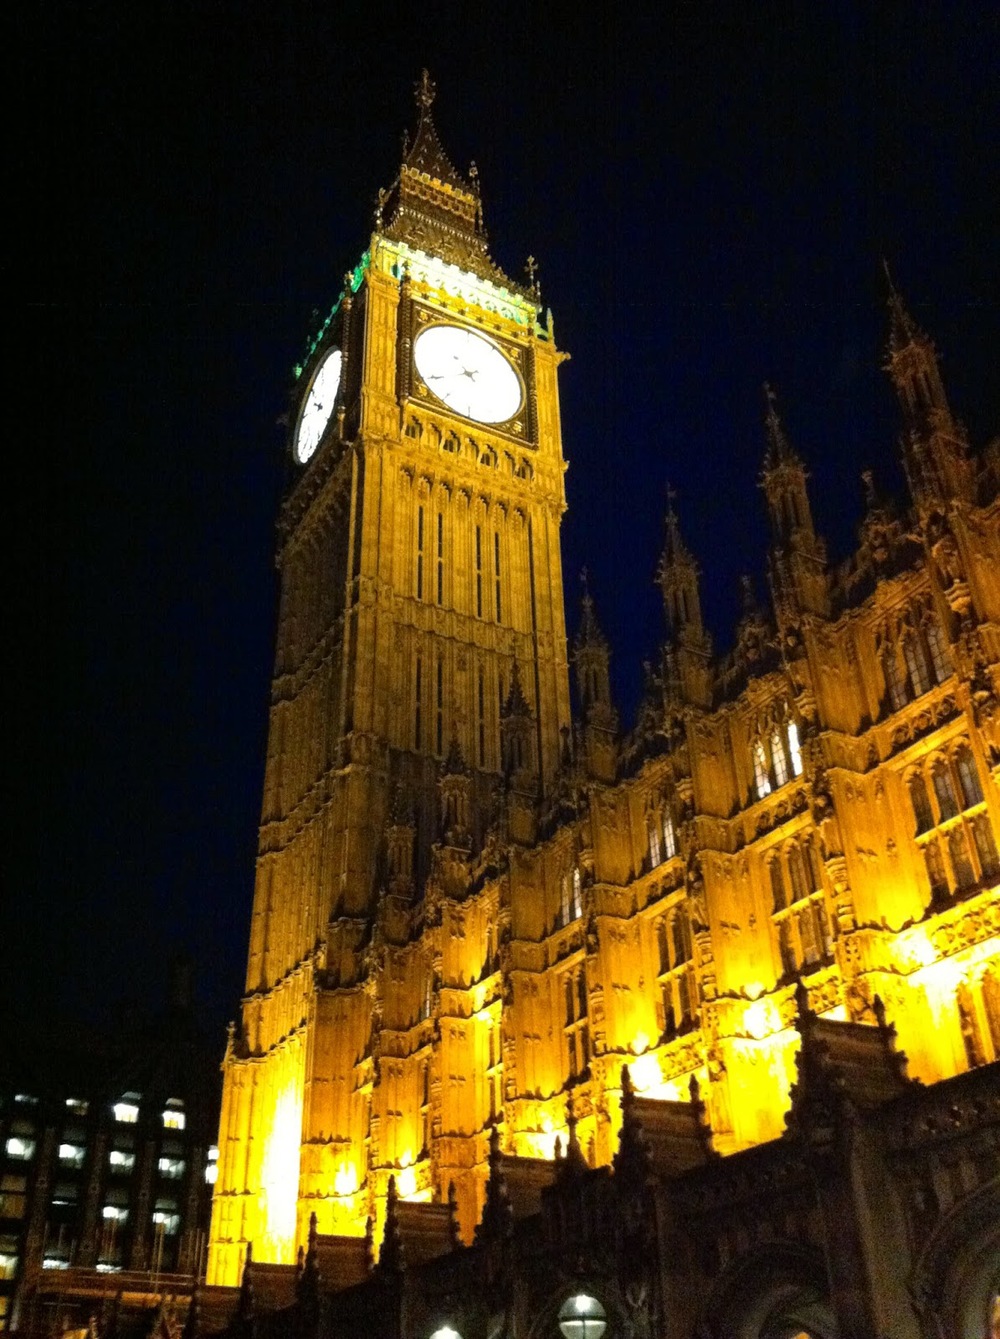 House of Commons and Big Ben at 11pm